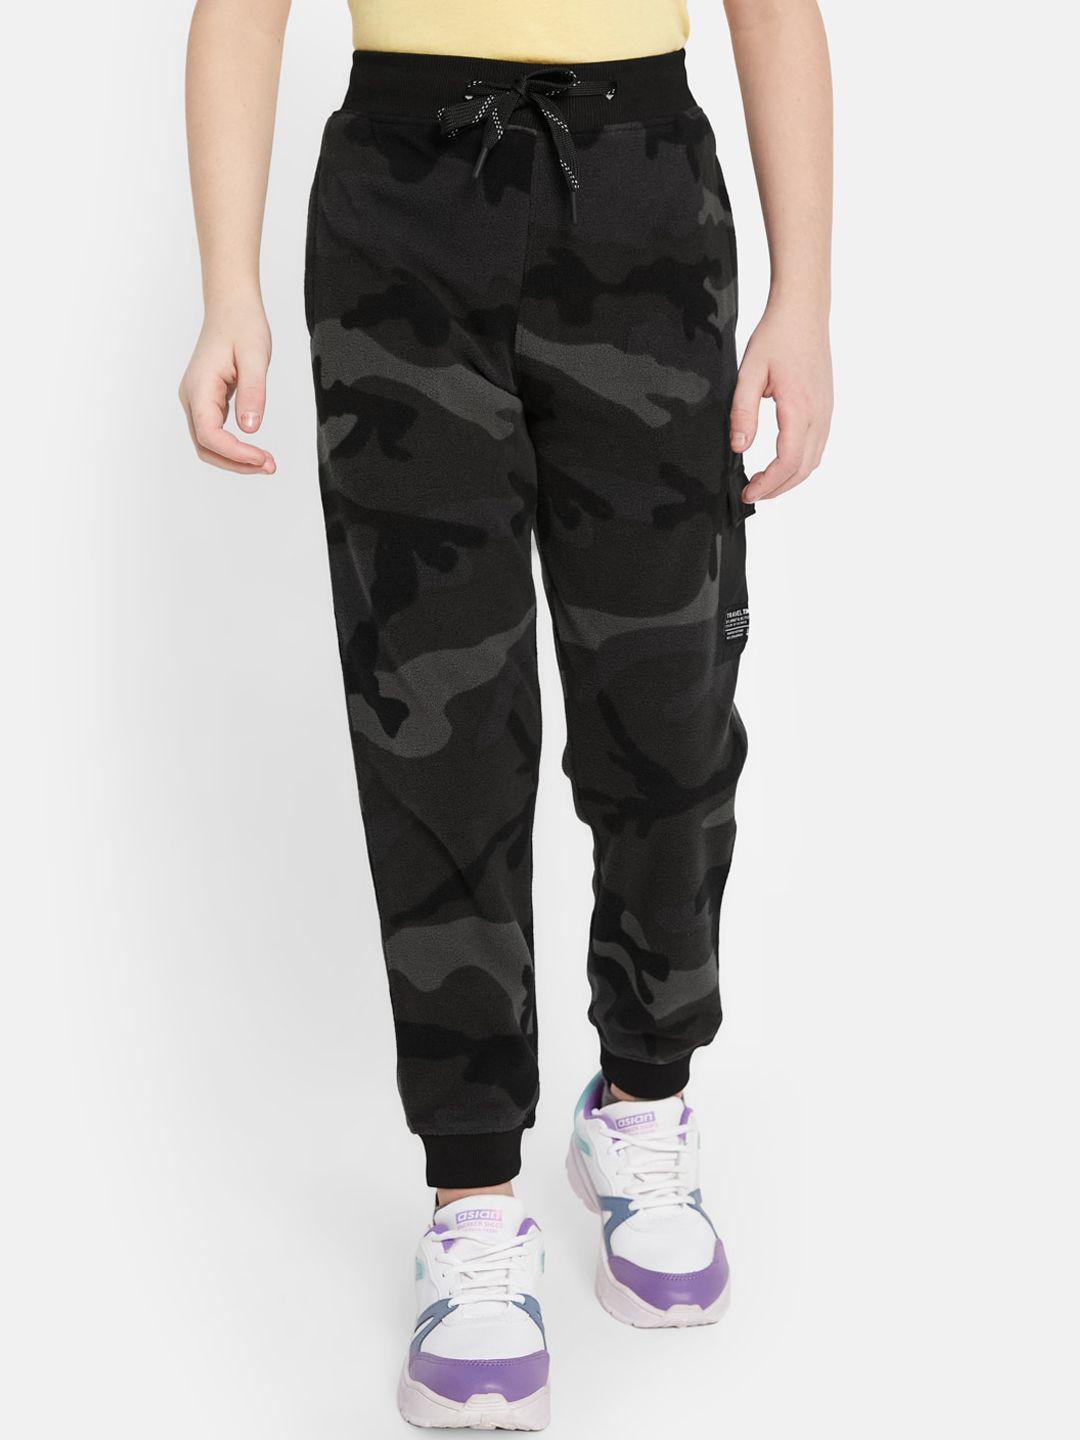 octave boys camouflage printed mid-rise fleece joggers